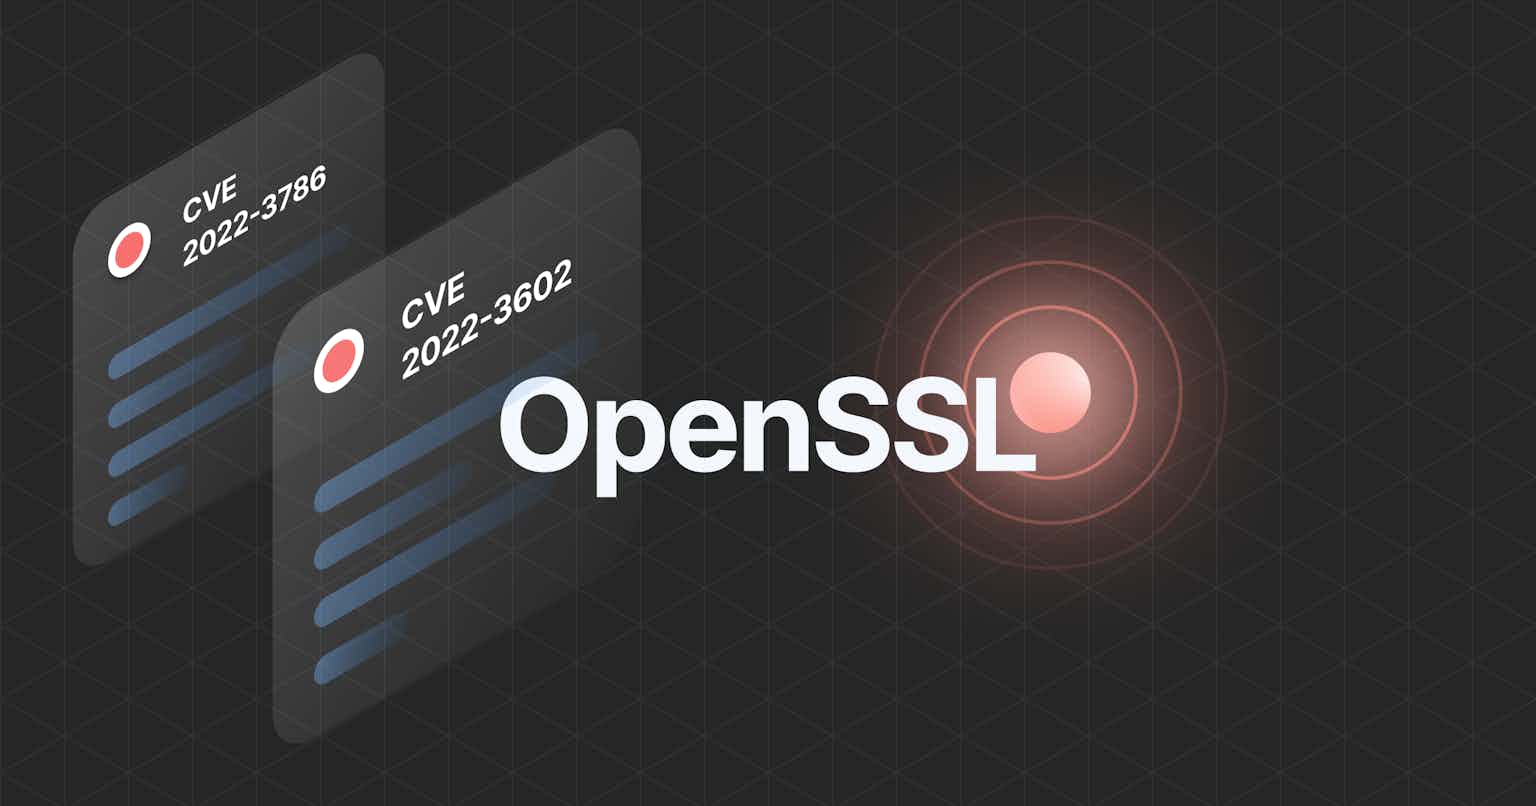 Read the article titled Everything you need to know about the new OpenSSL vulnerabilities (CVE-2022-3602 & CVE-2022-3786)